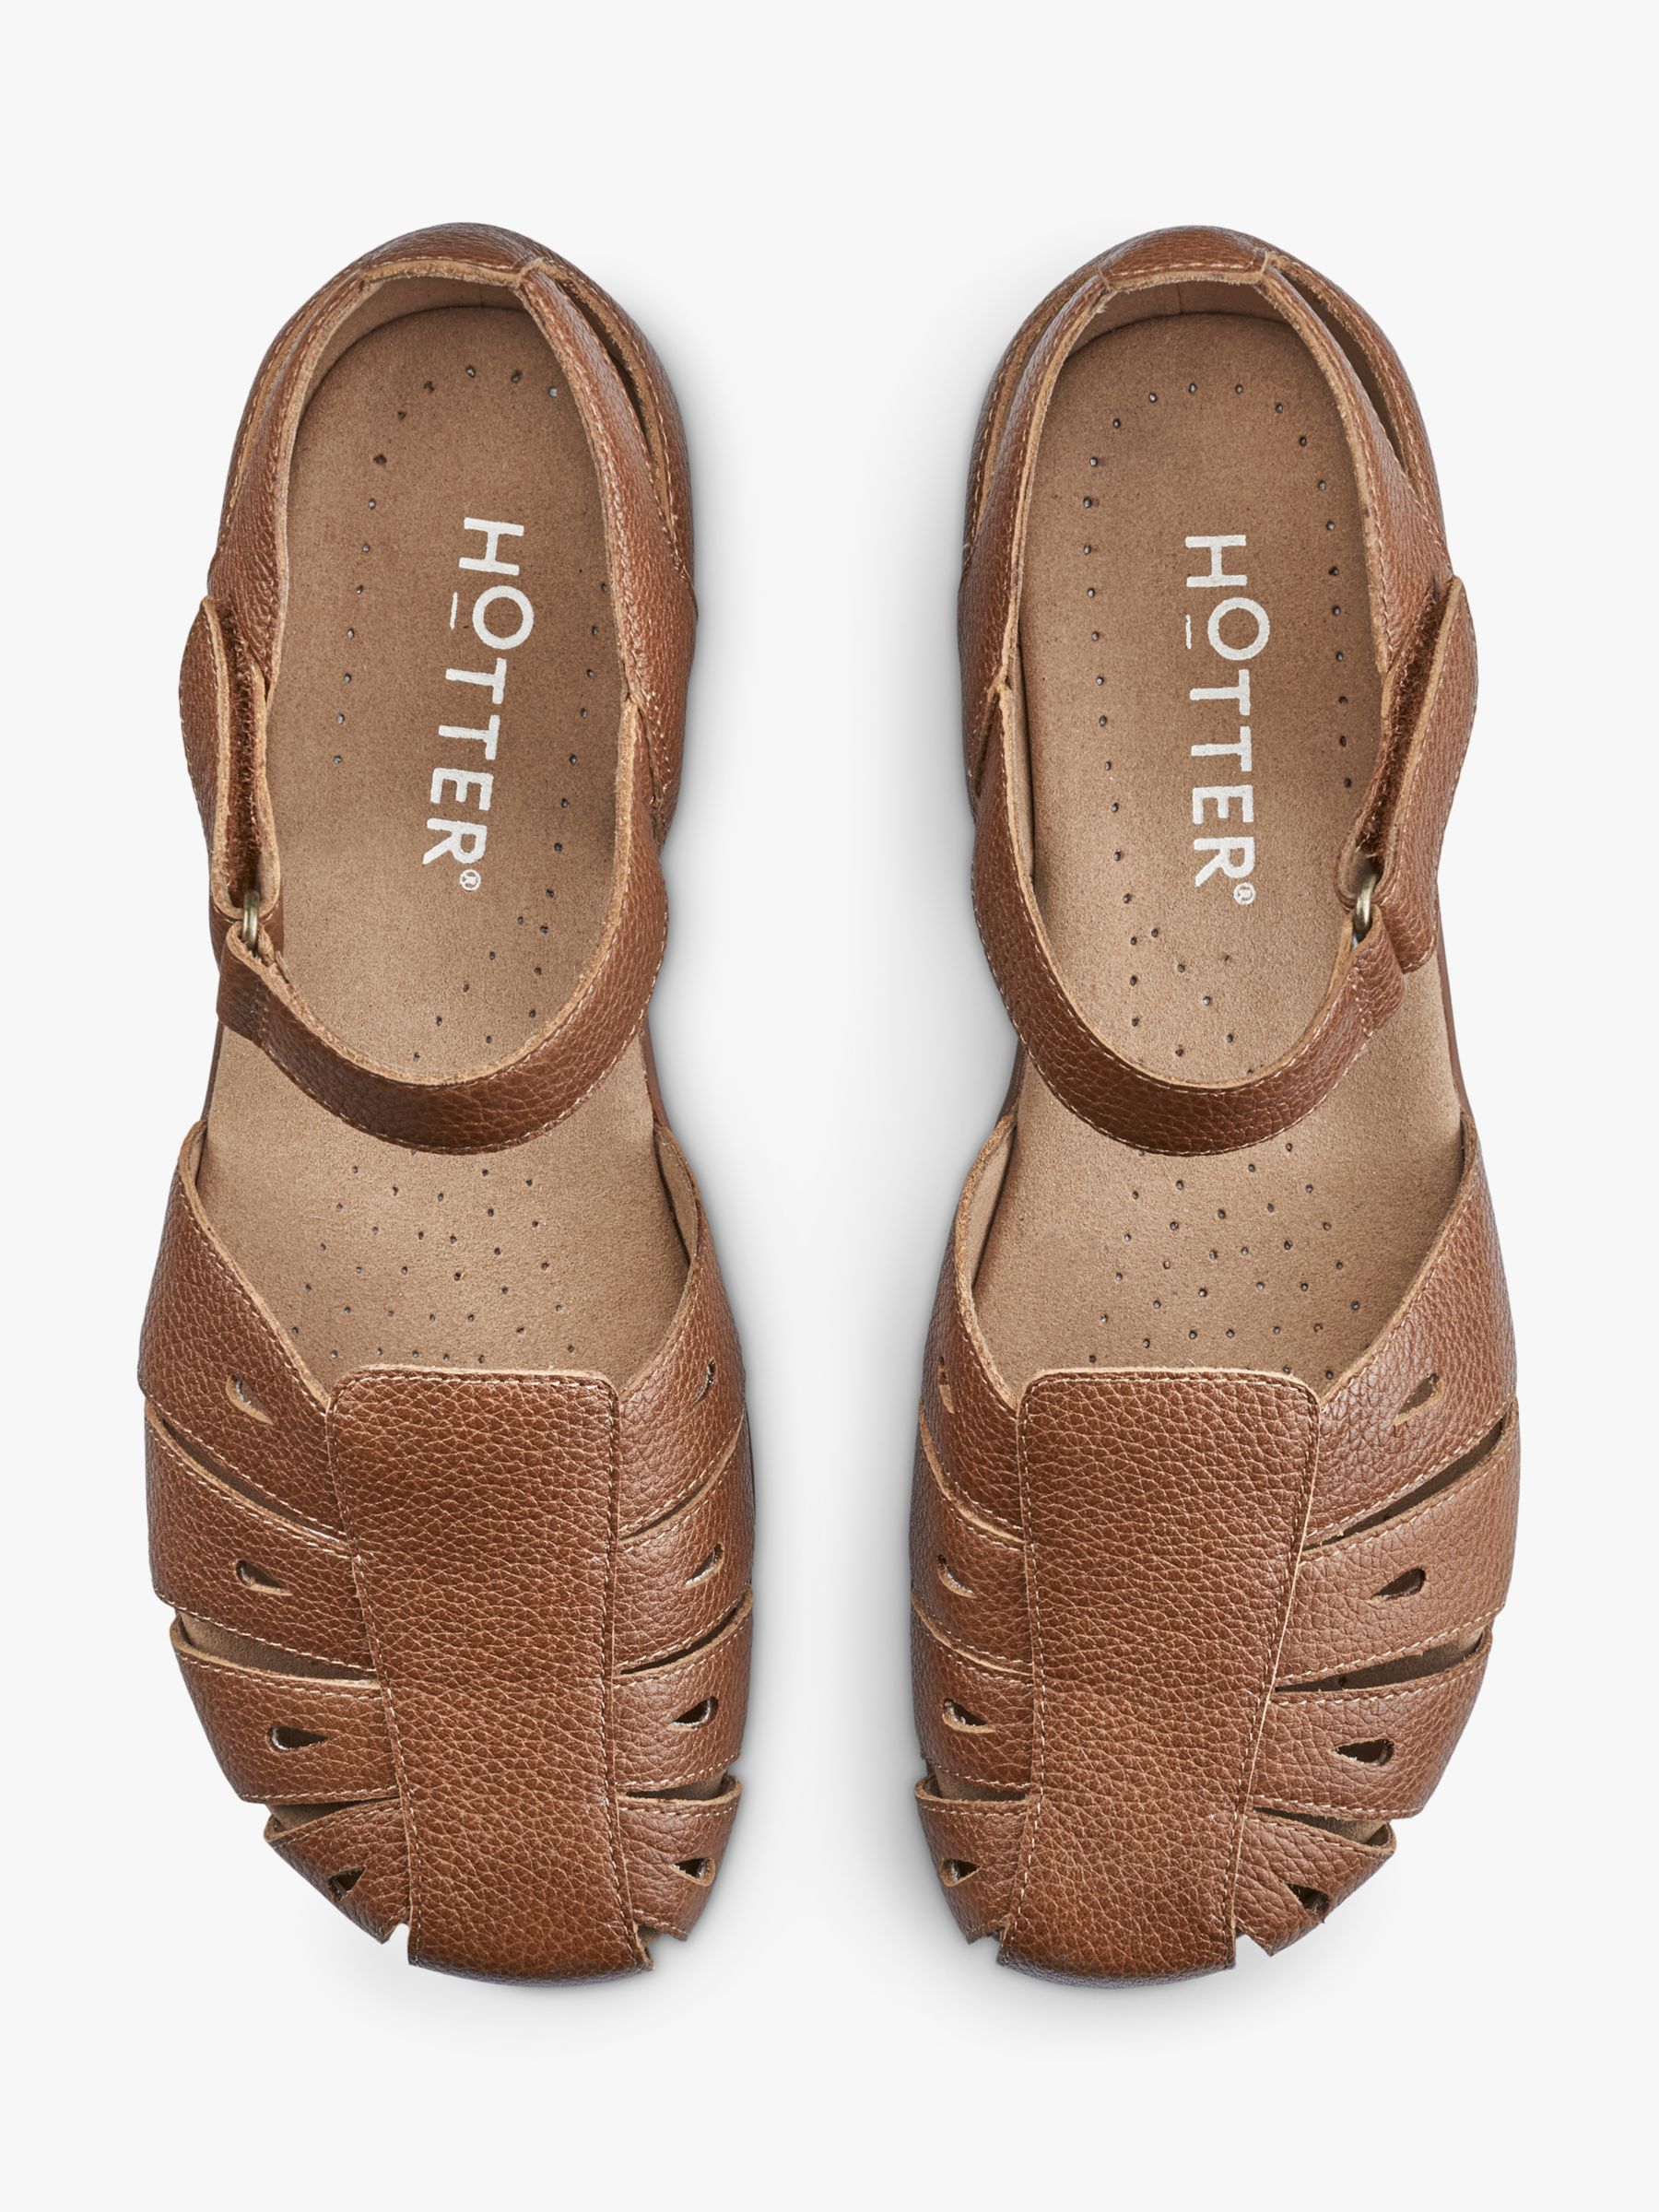 Buy Hotter May Wide Fit Fisherman Style Sandals, Tan Online at johnlewis.com